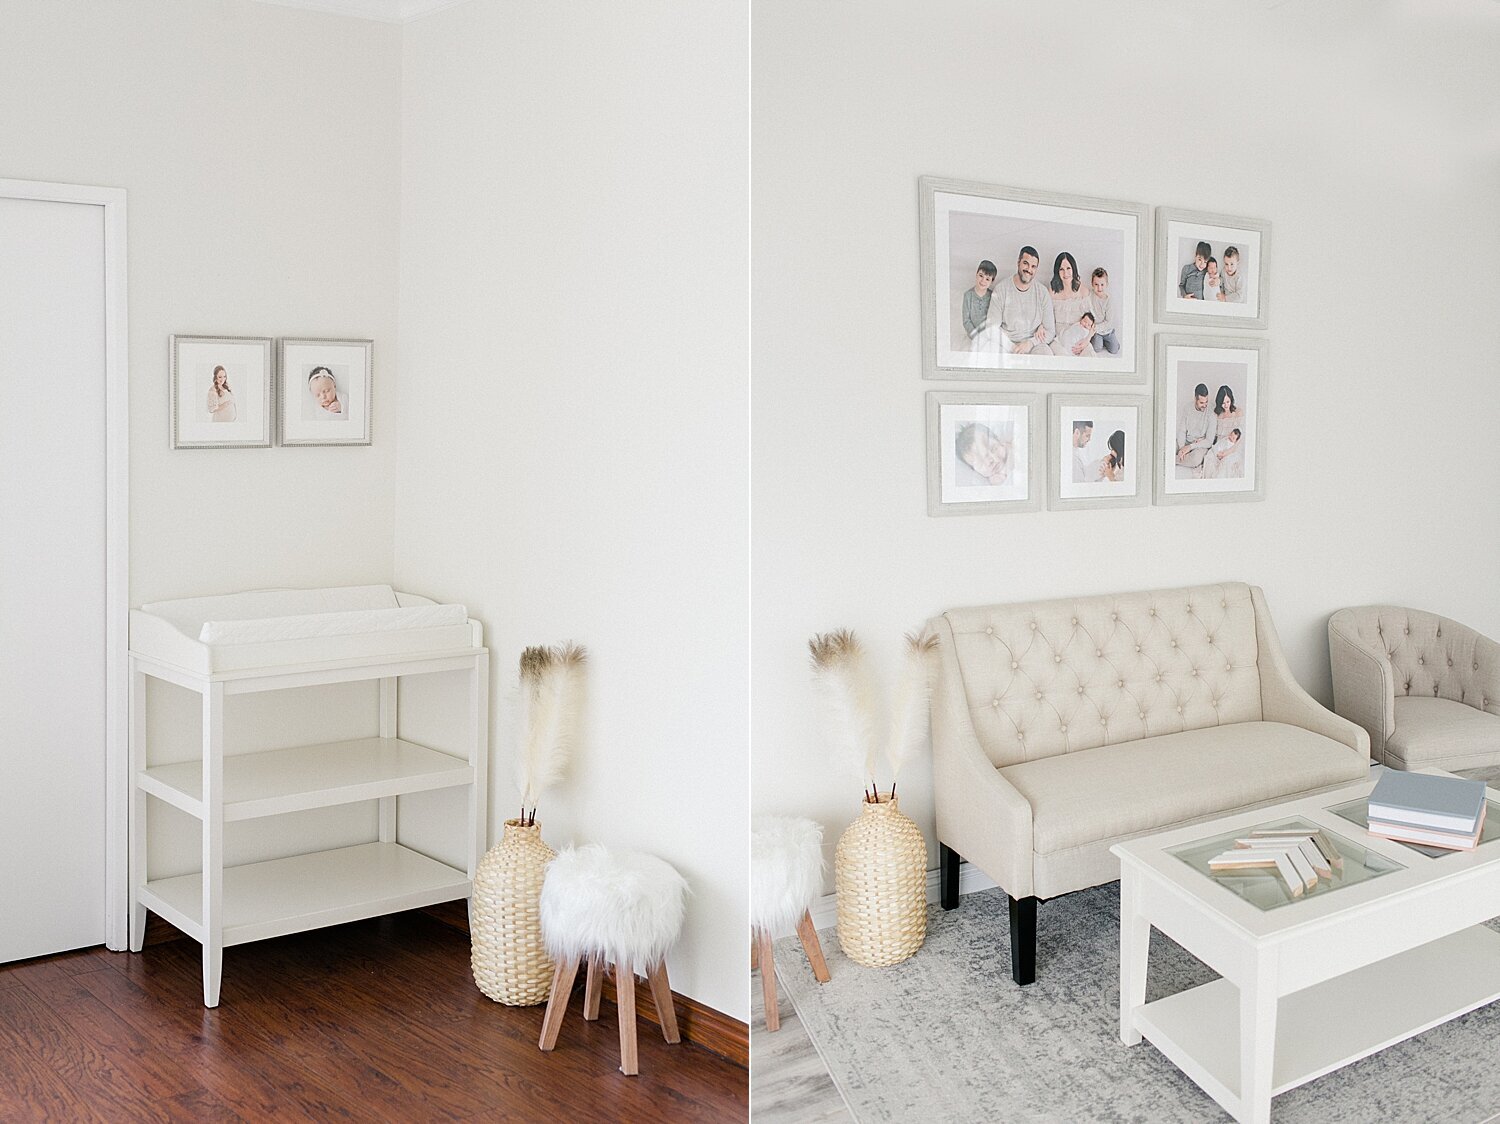 Sitting space and changing table area in Newport beach newborn photography studio | Ambre Williams Photography